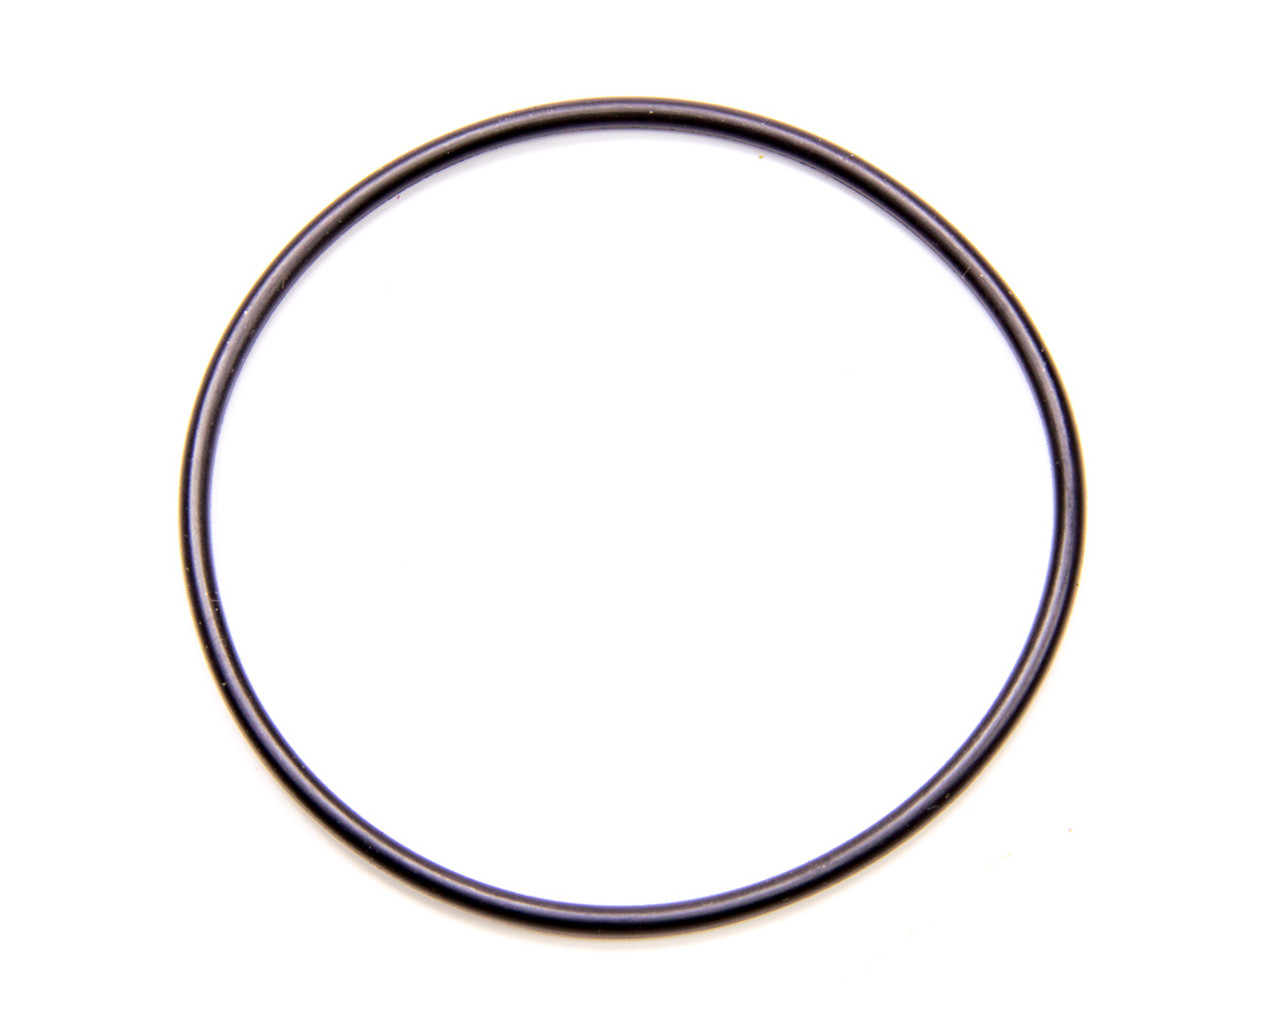 Diversified CT1 Seal O-Ring for Seal Plate - DMIRRC-1003